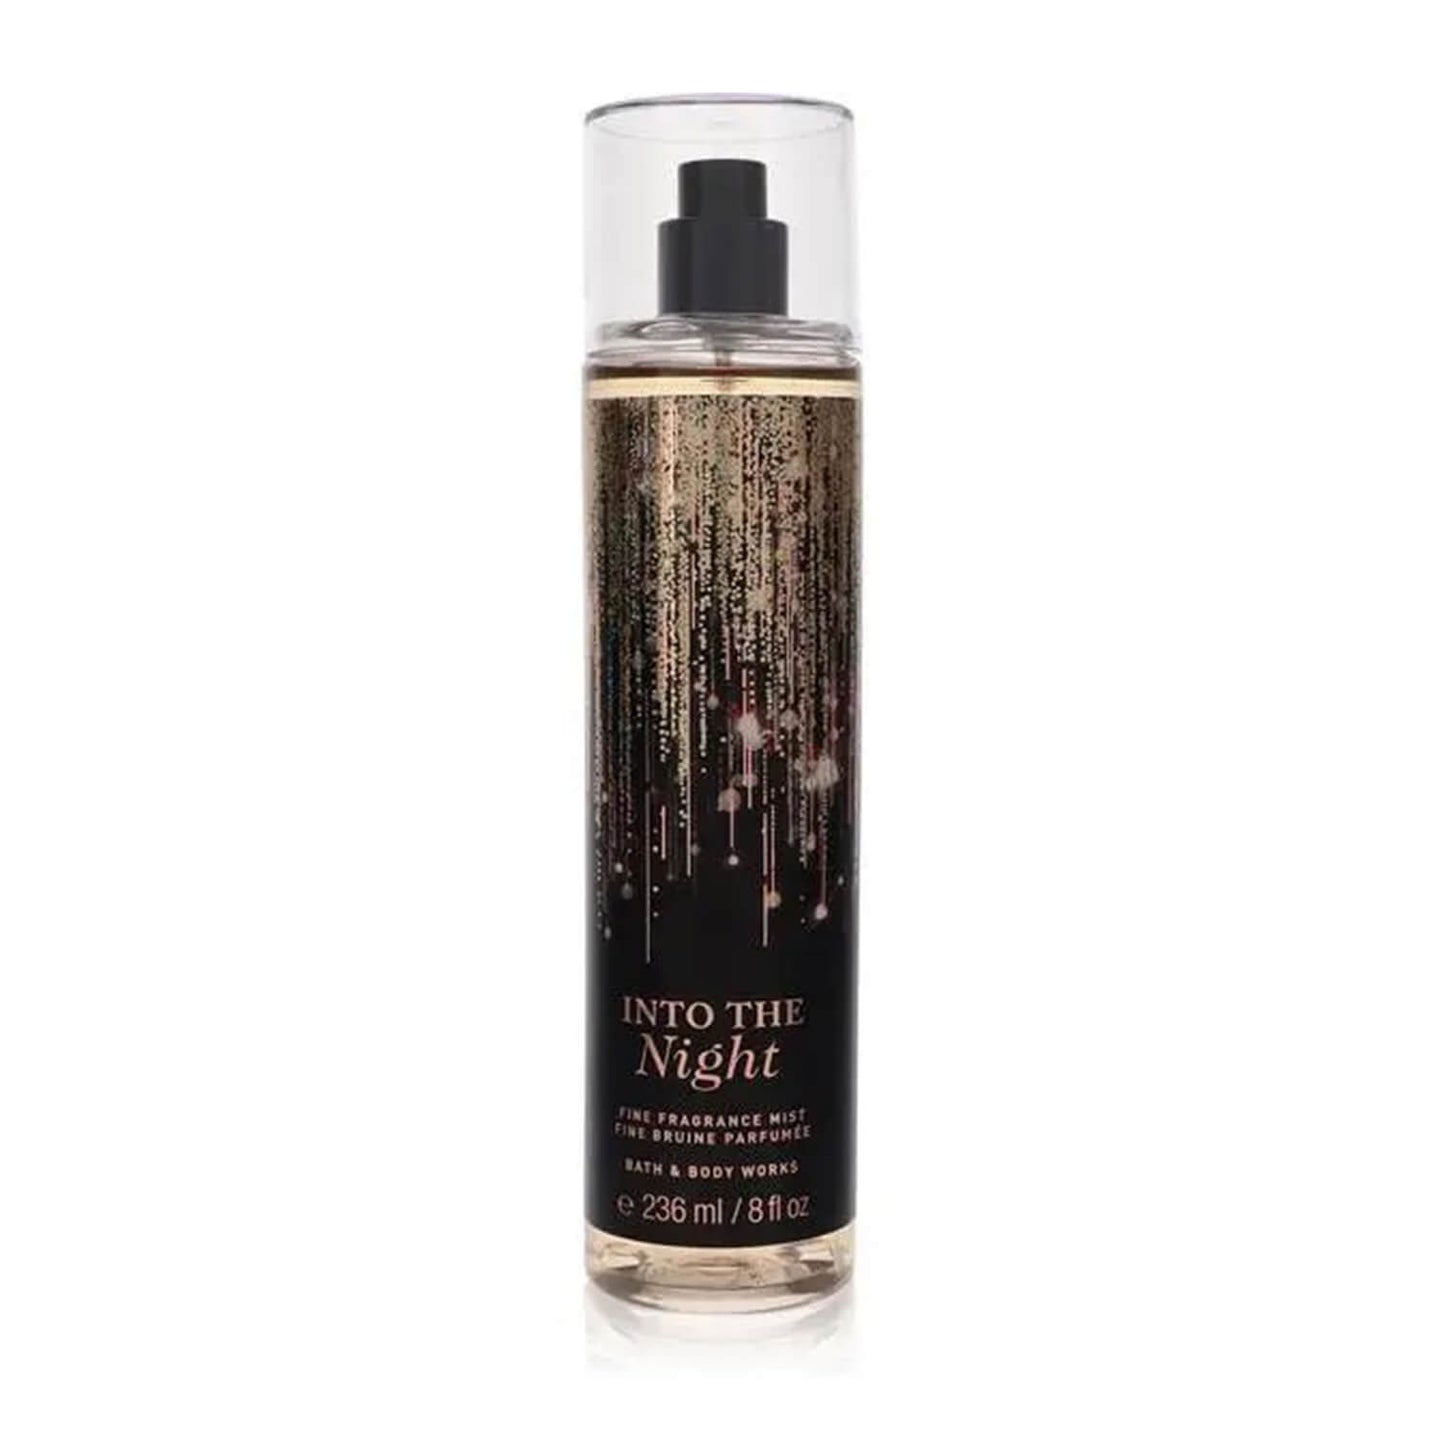 buy bath and body works into the night mist available at heygirl.pk for delivery in Pakistan